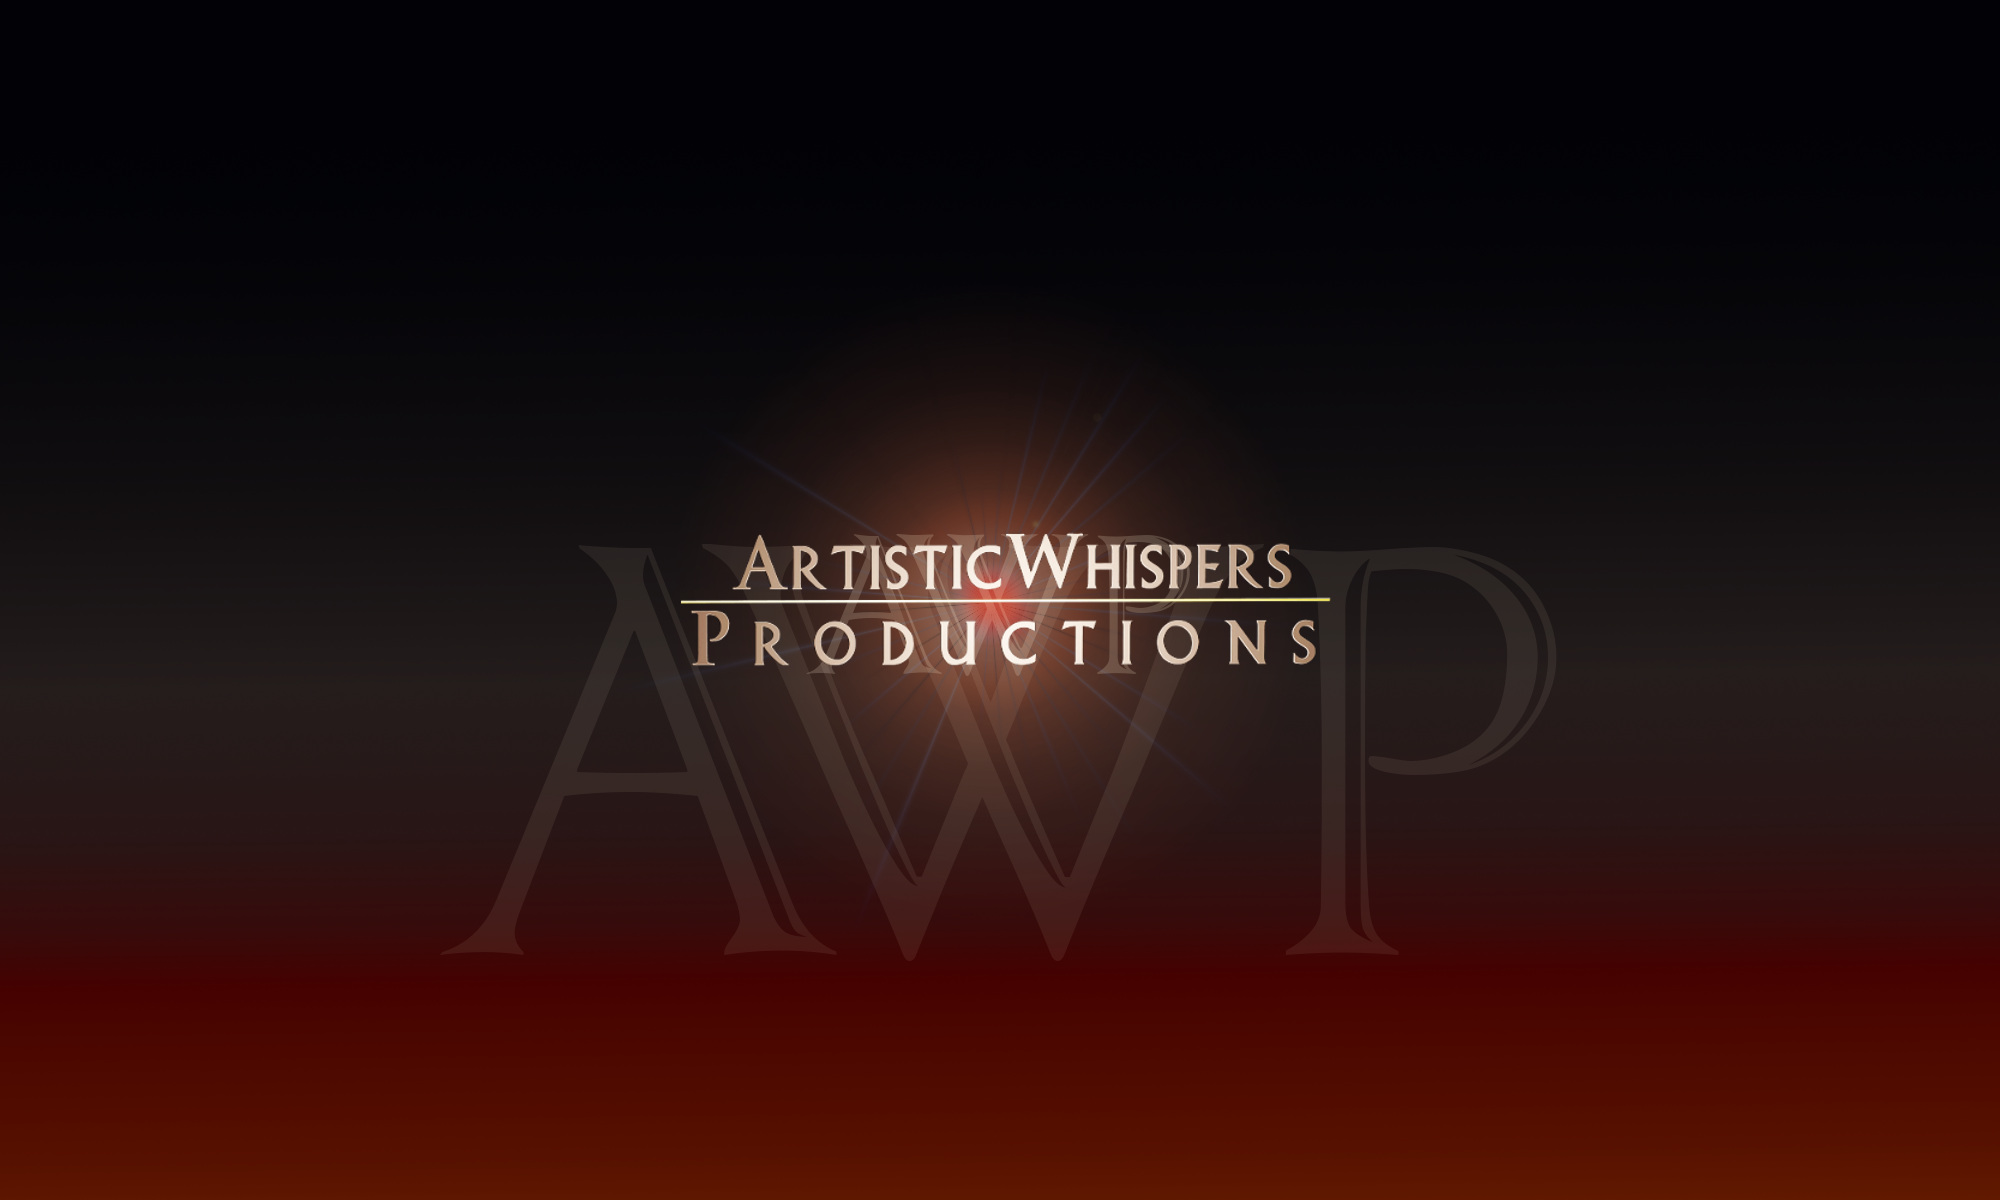 ArtisticWhispers Productions